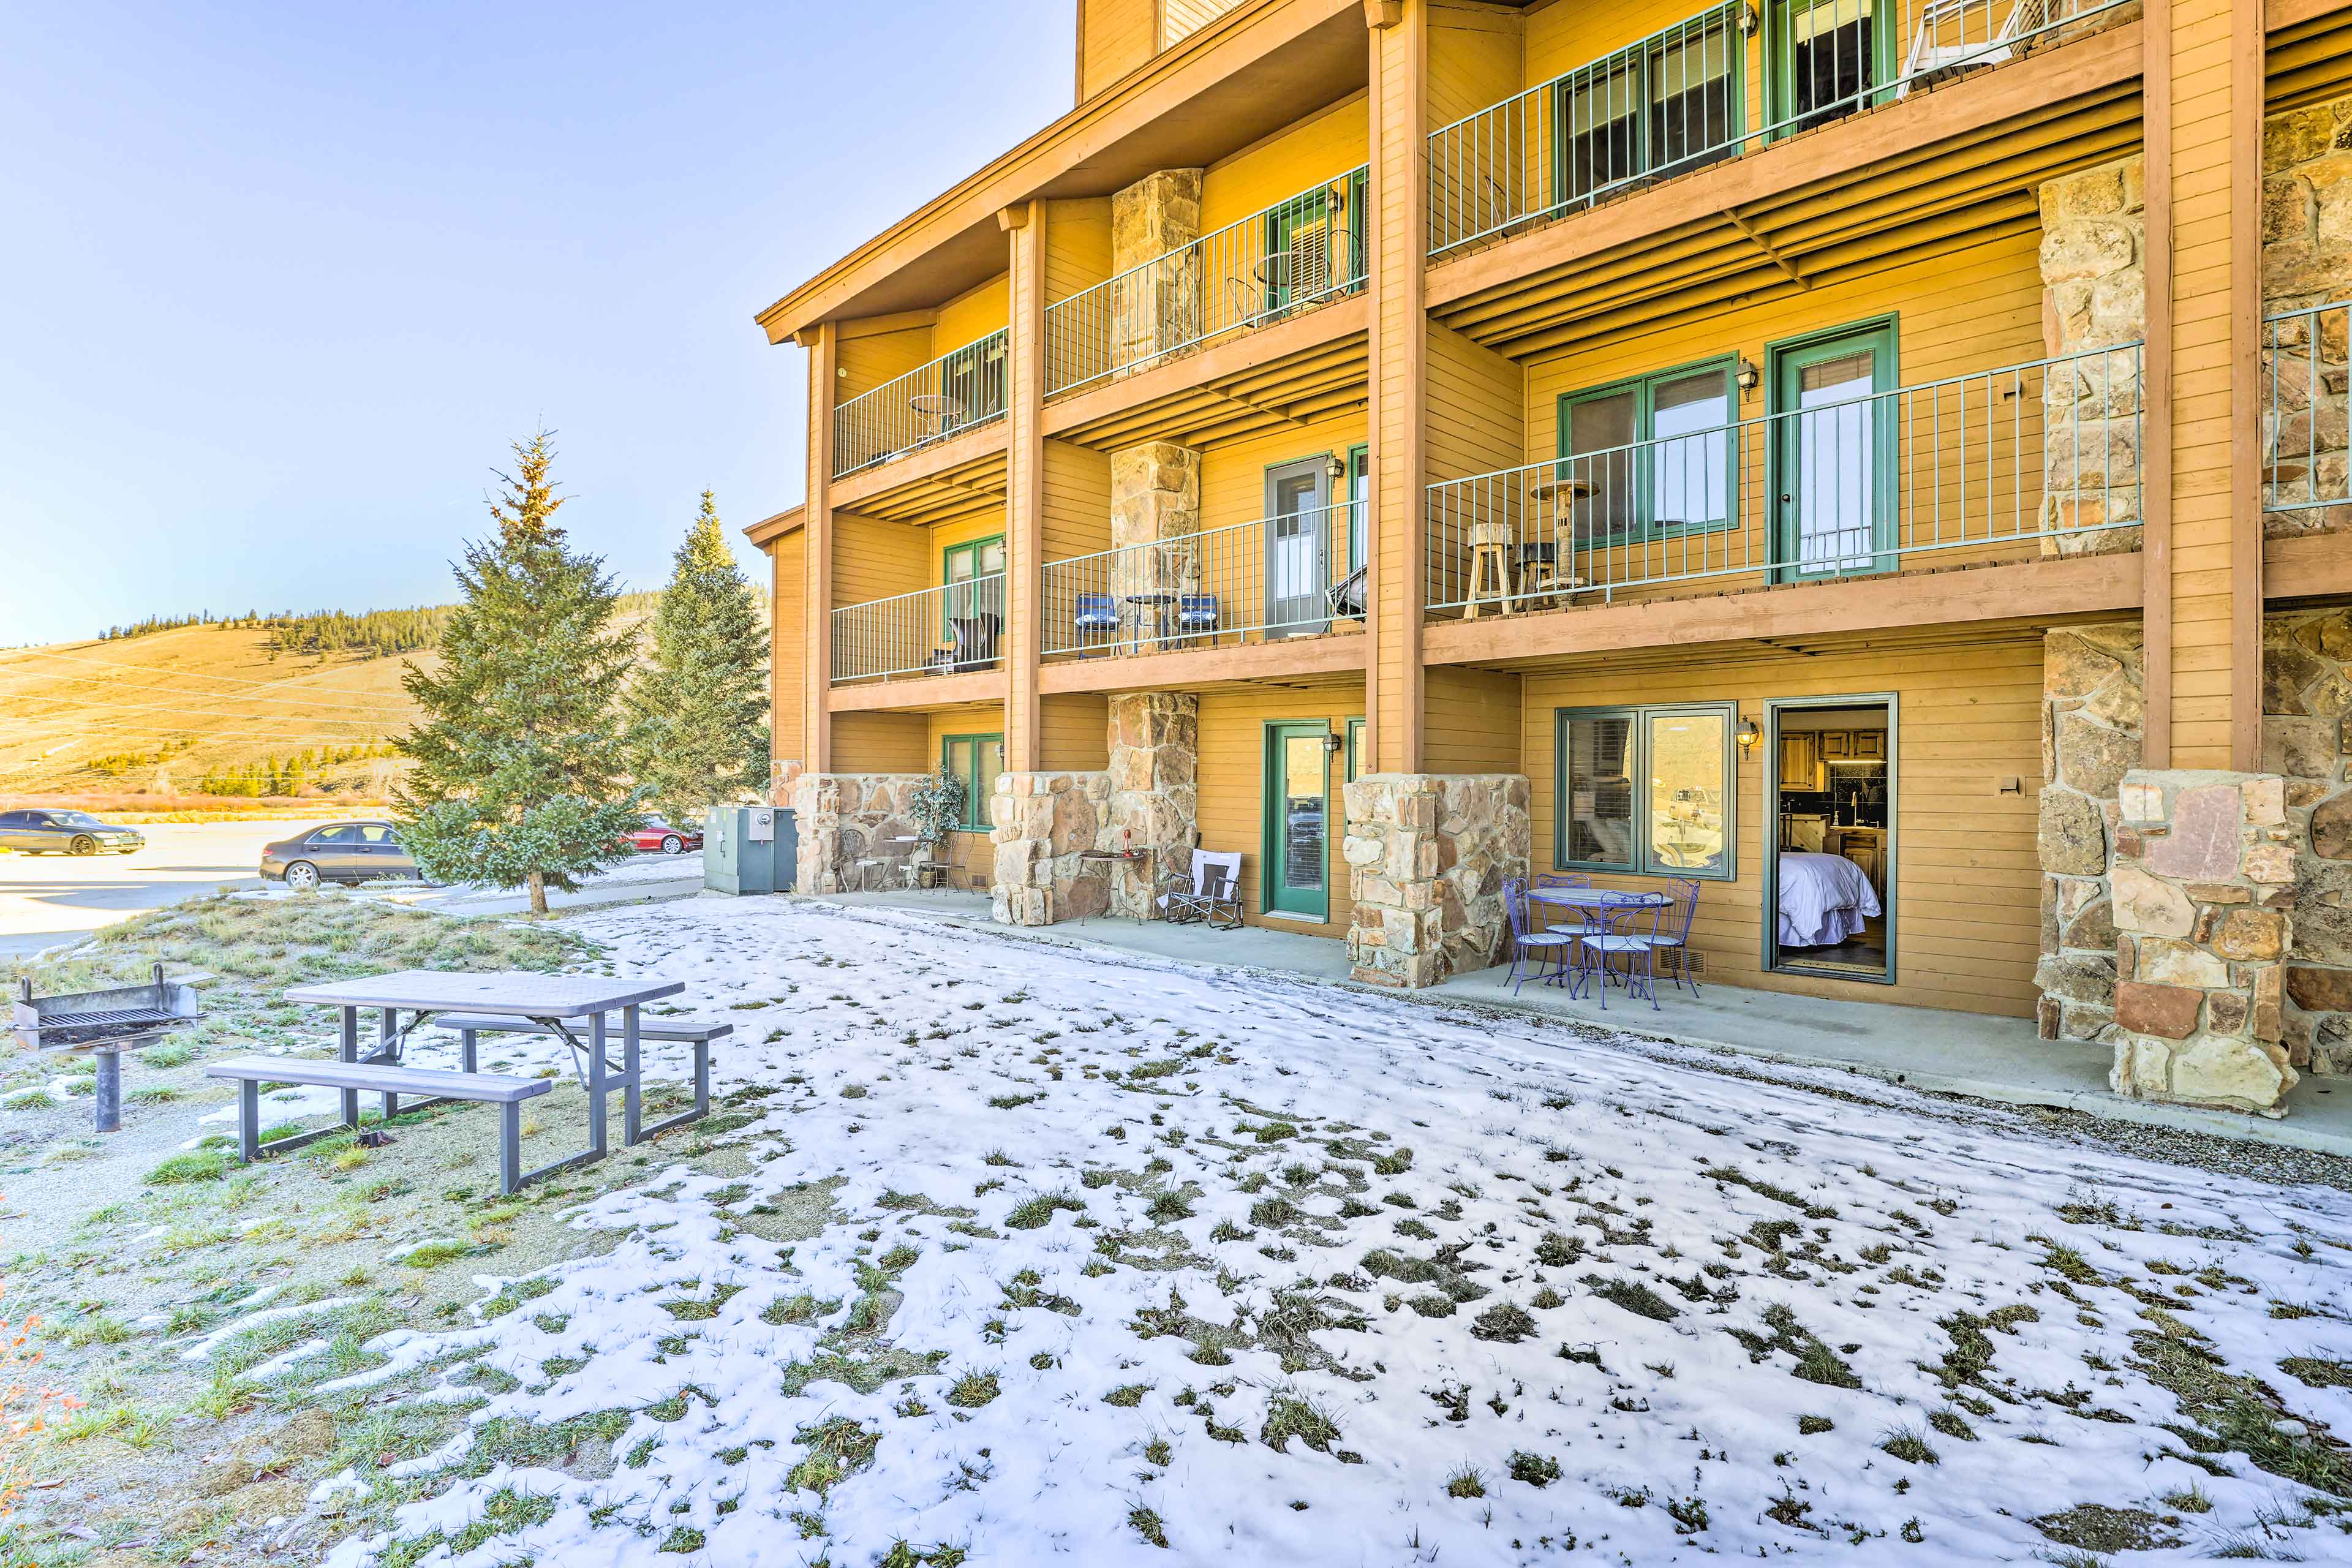 Condo Exterior | Access to Community Amenities | < 3 Mi to Downtown Granby